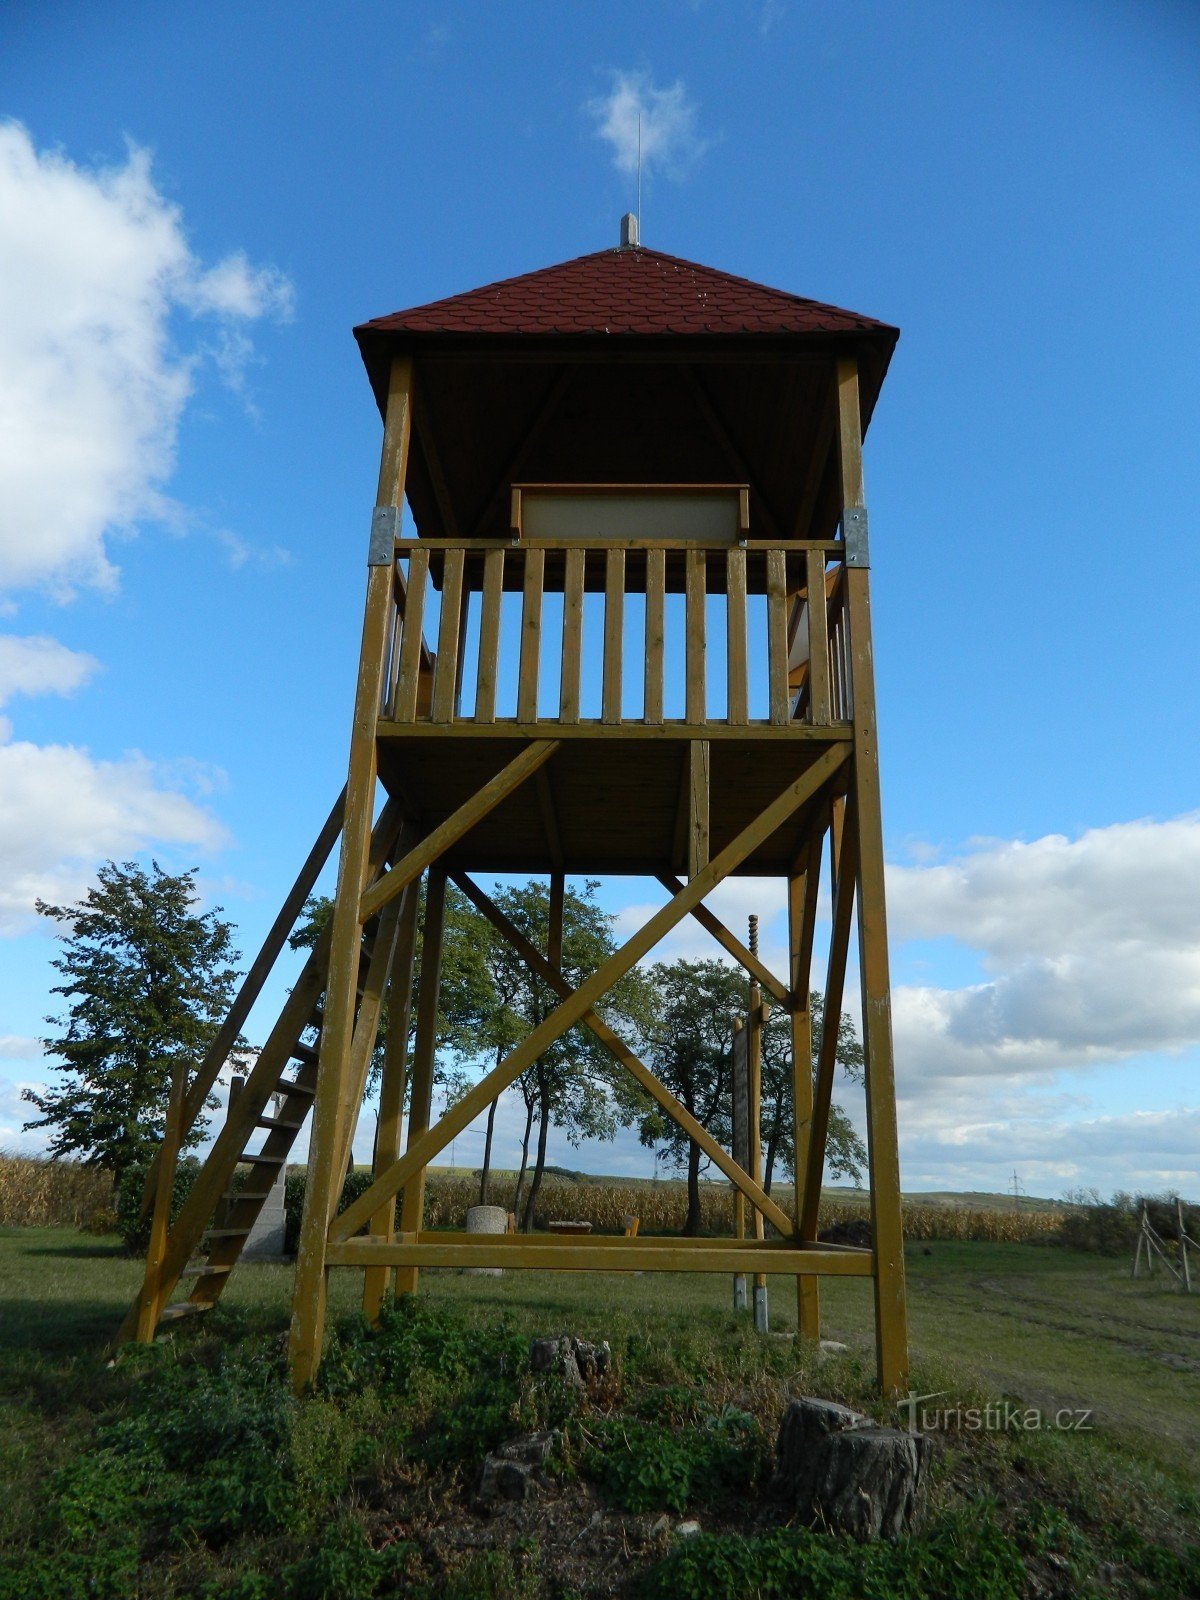 Lookout tower In the picture